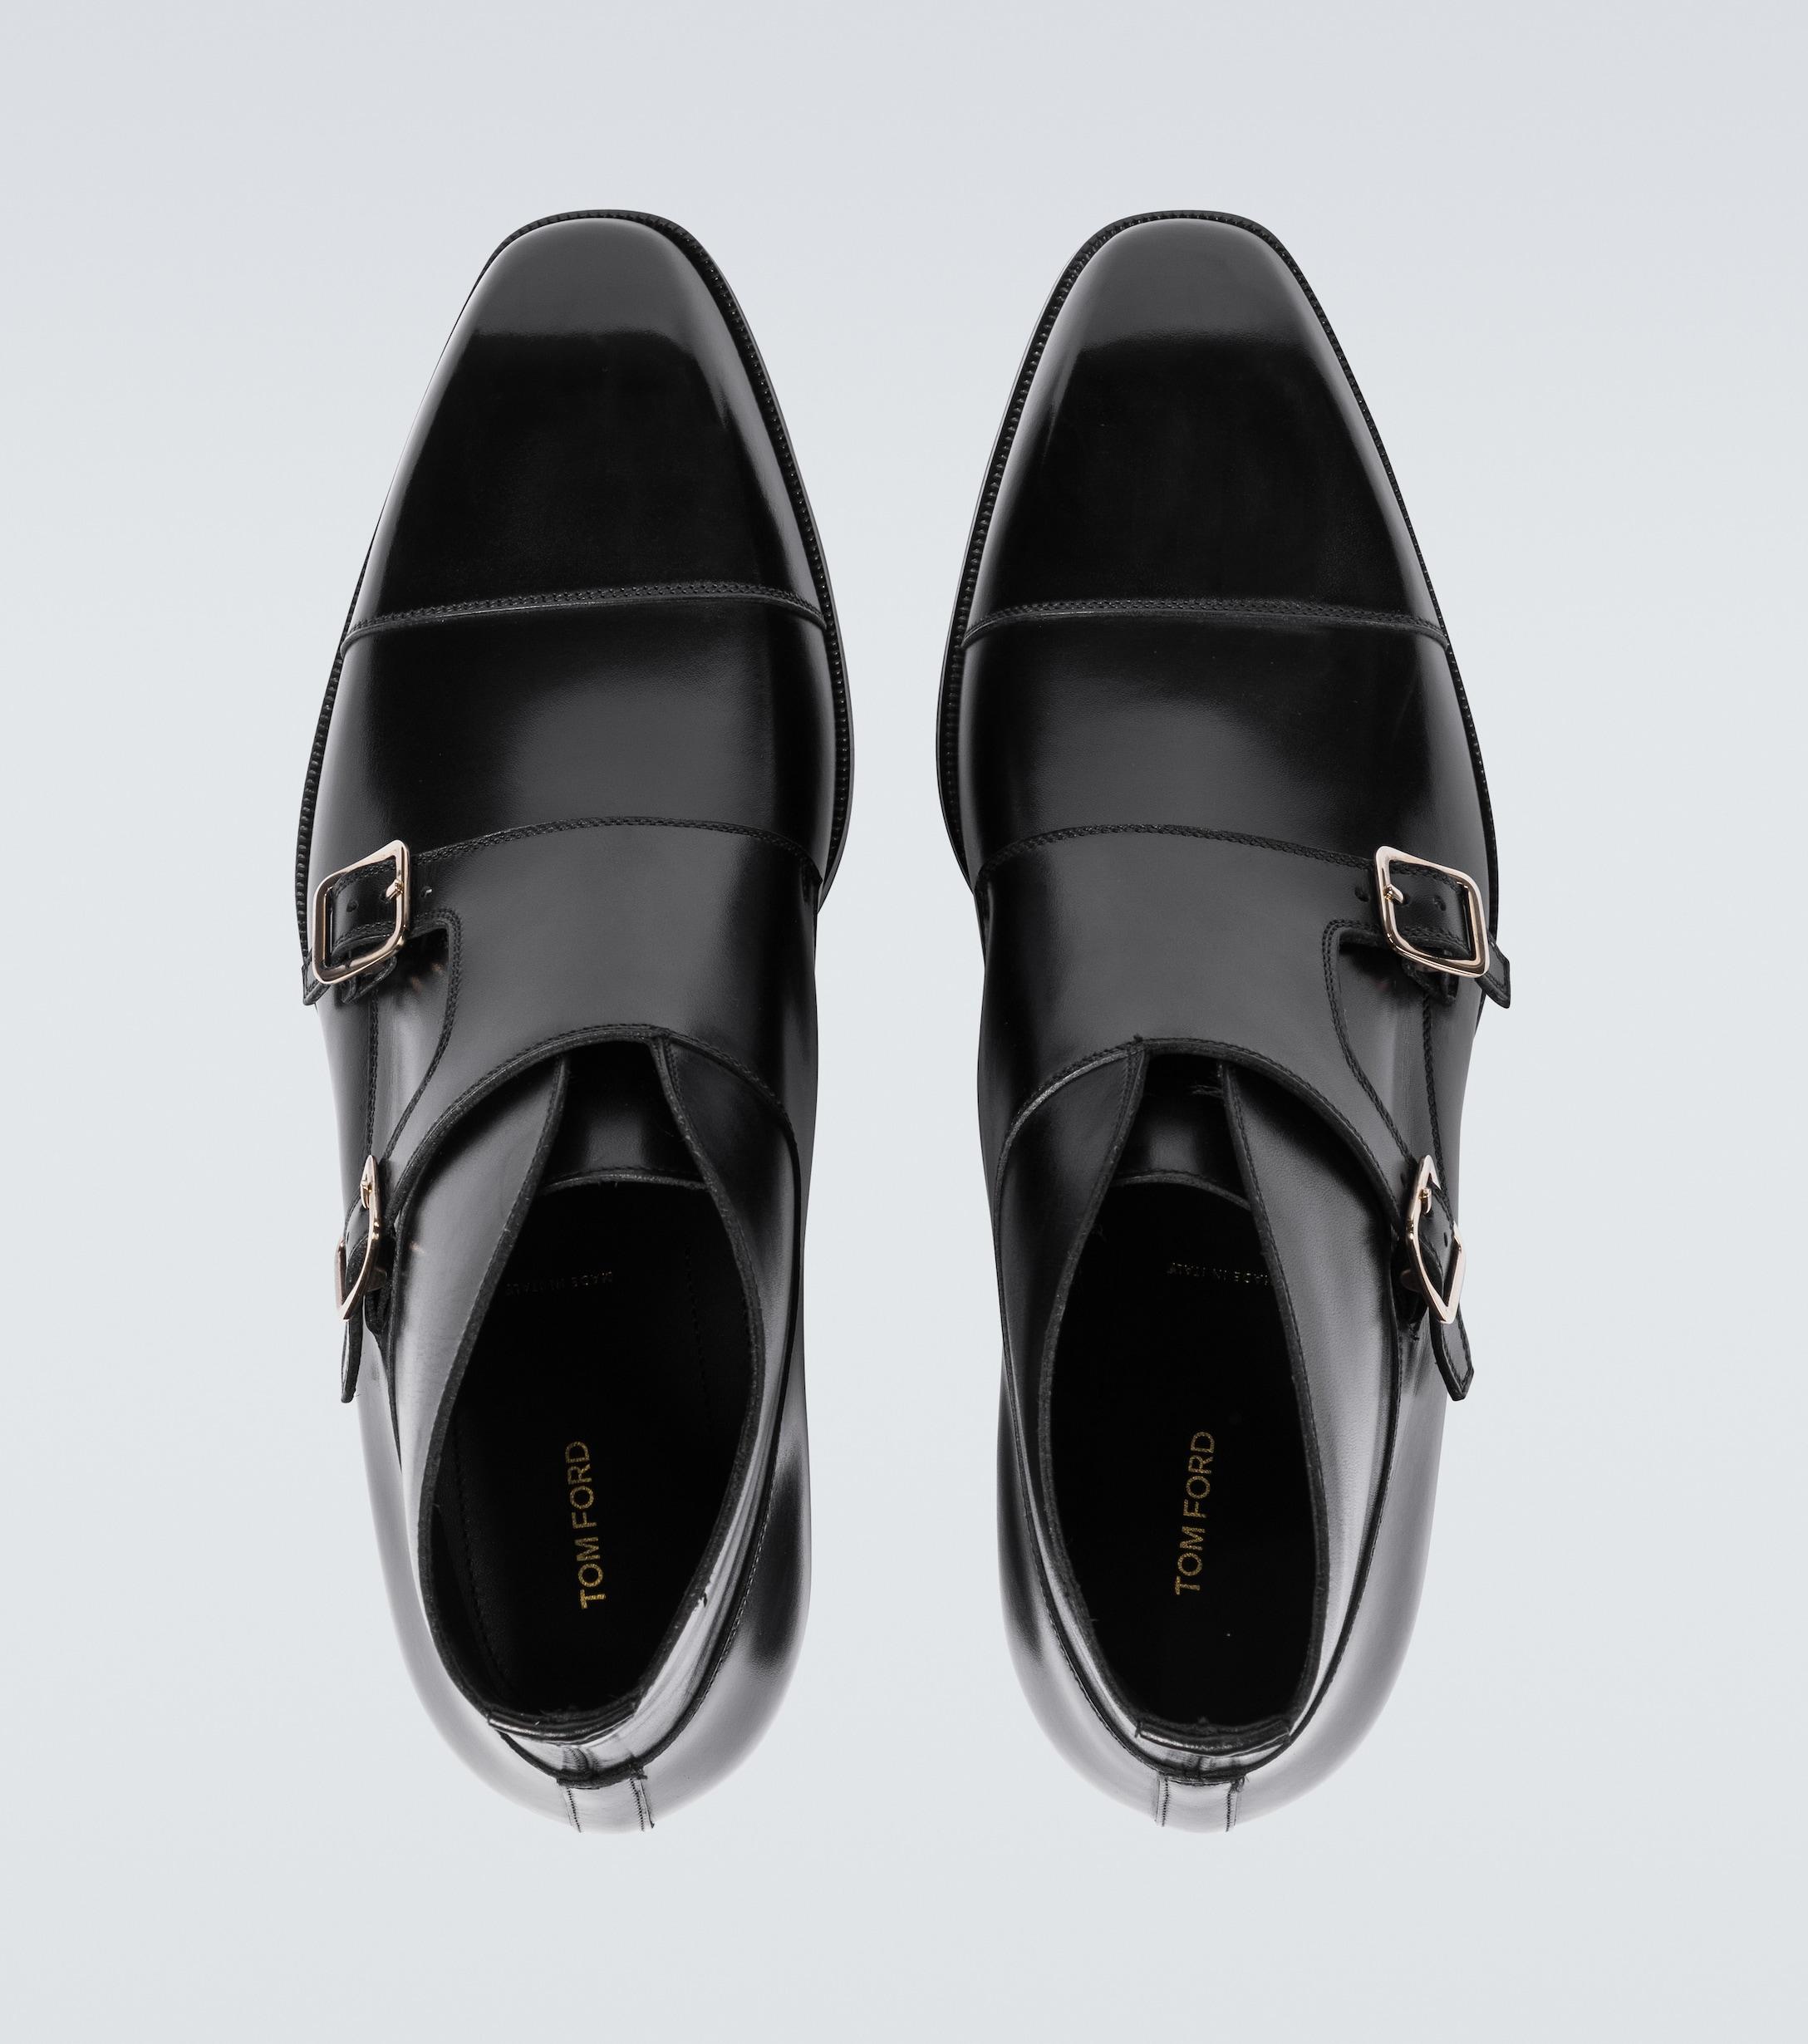 Tom Ford Leather Sutherland Double Monk Strap Shoes in Black for Men - Lyst